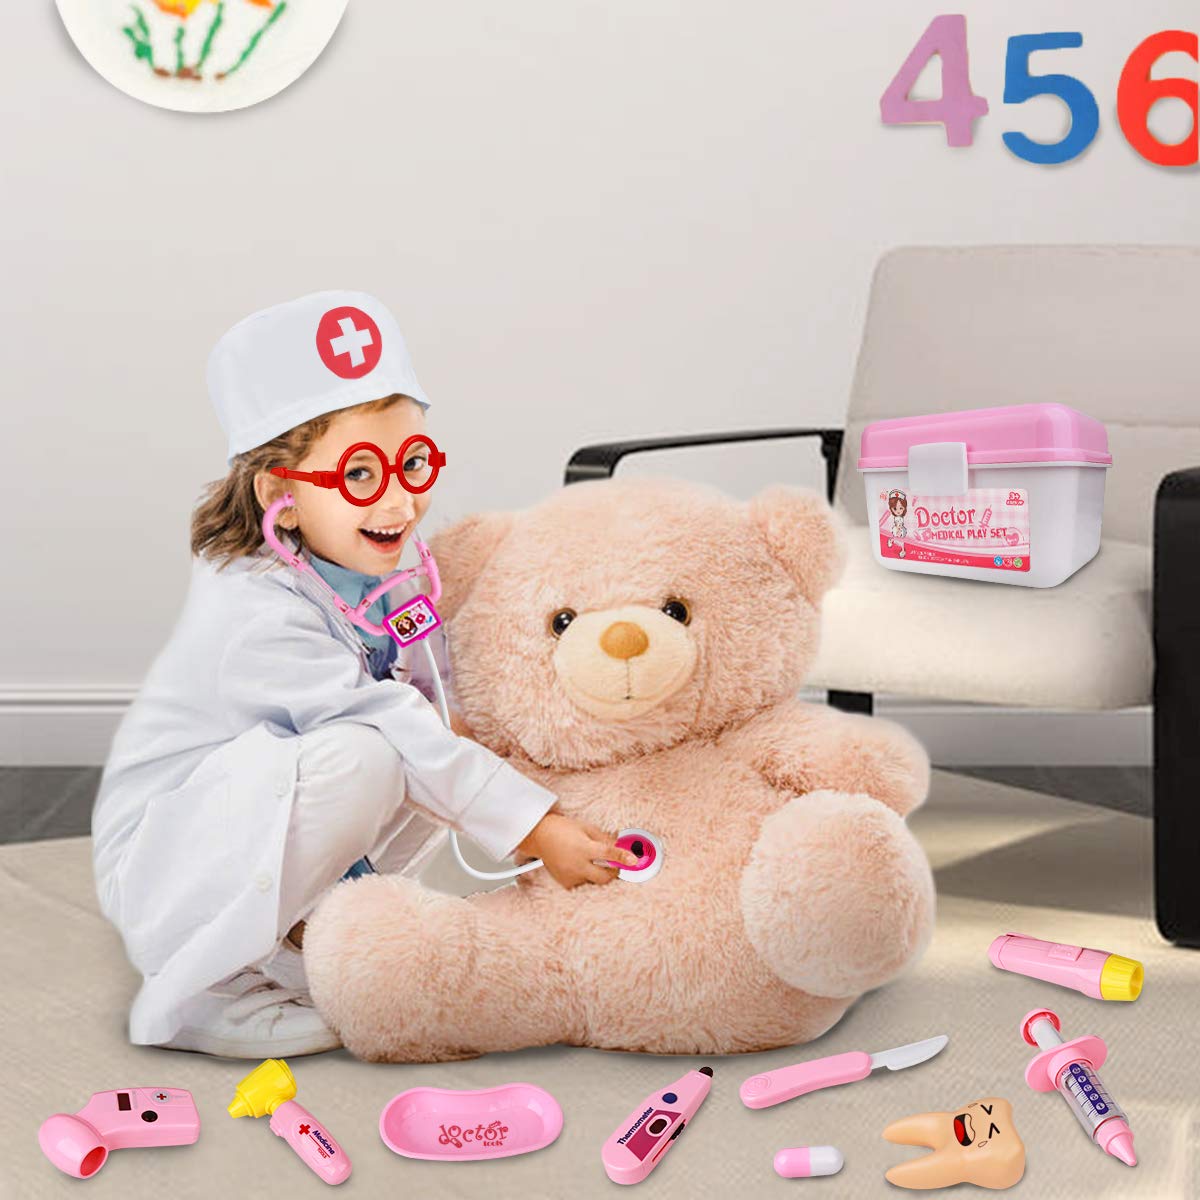 LOYO Medical Kit for Kids - 35 Pieces Doctor Pretend Play Equipment, Dentist Kit for Kids, Doctor Play Set with Gift Case (Pink)